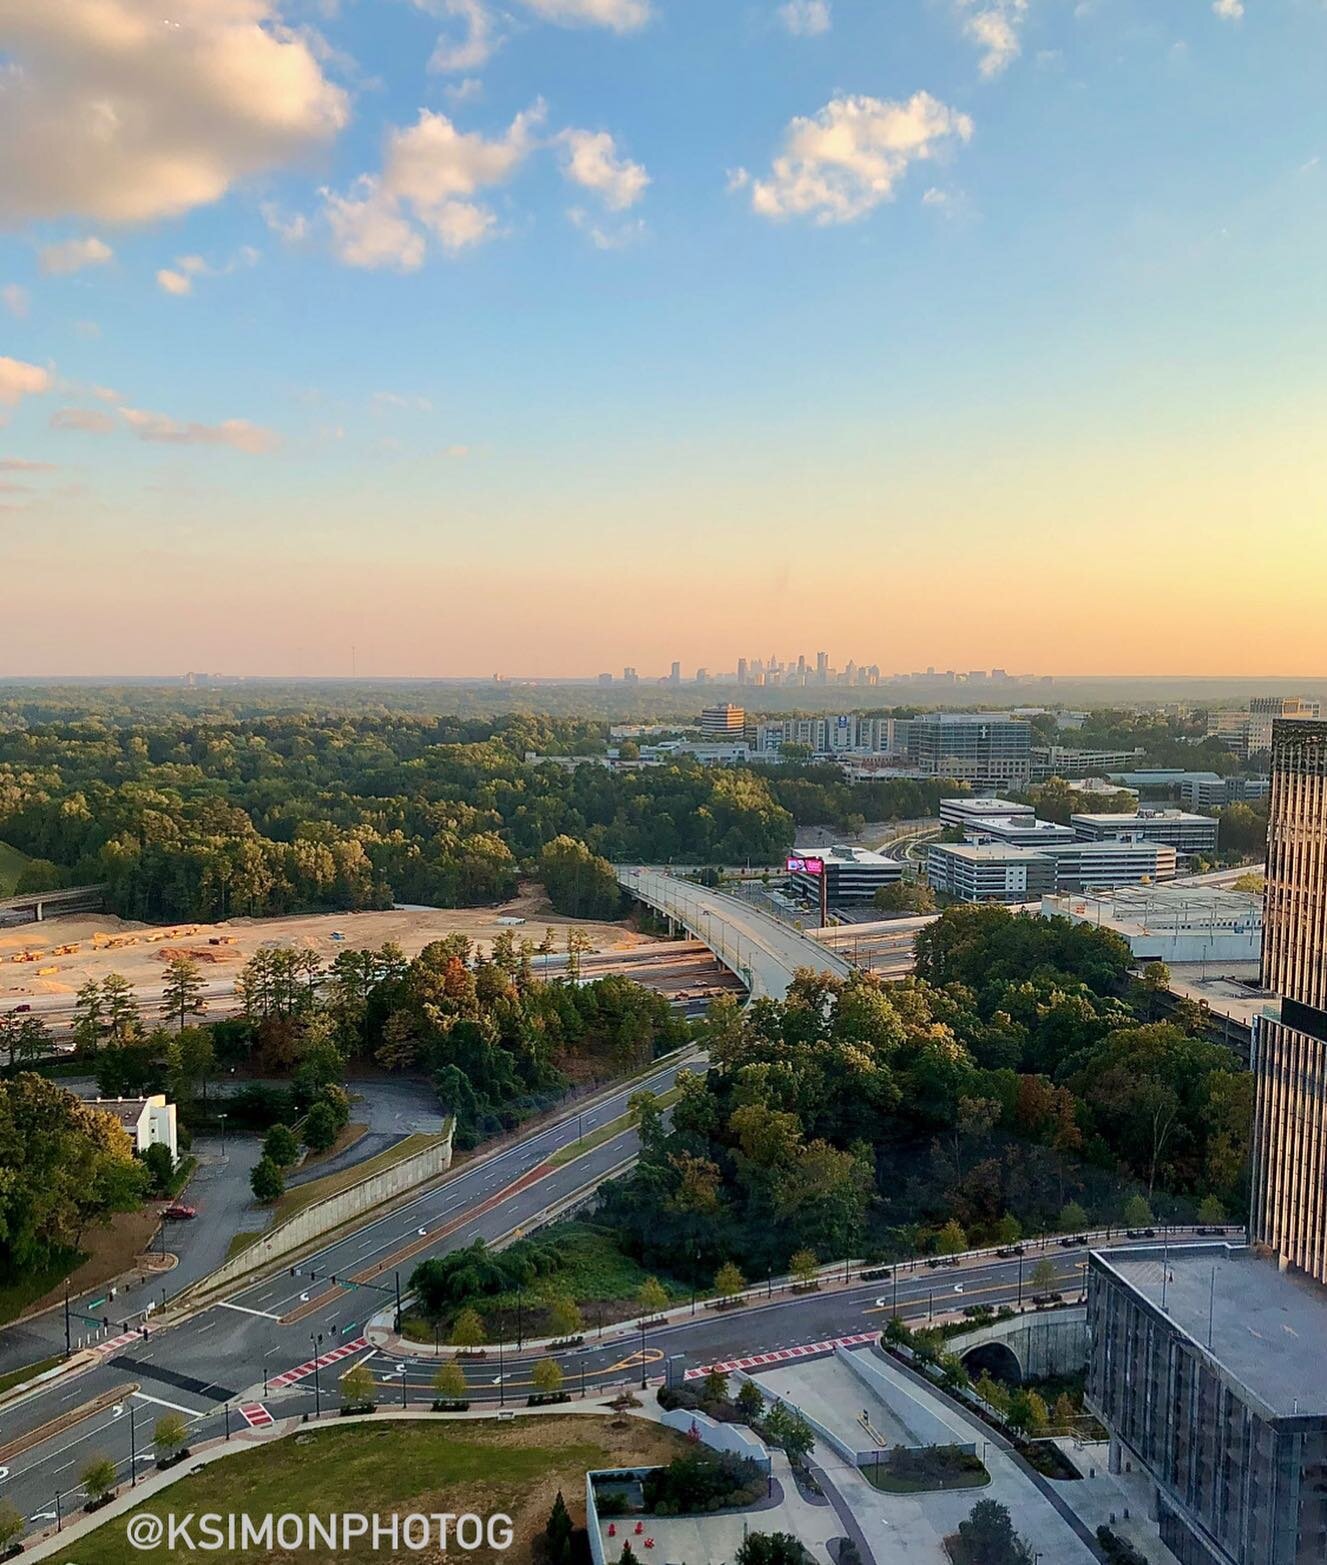 As you achieve your goals, don&rsquo;t forget to stop and enjoy the view.
.
.
#cityofatlanta
.
.